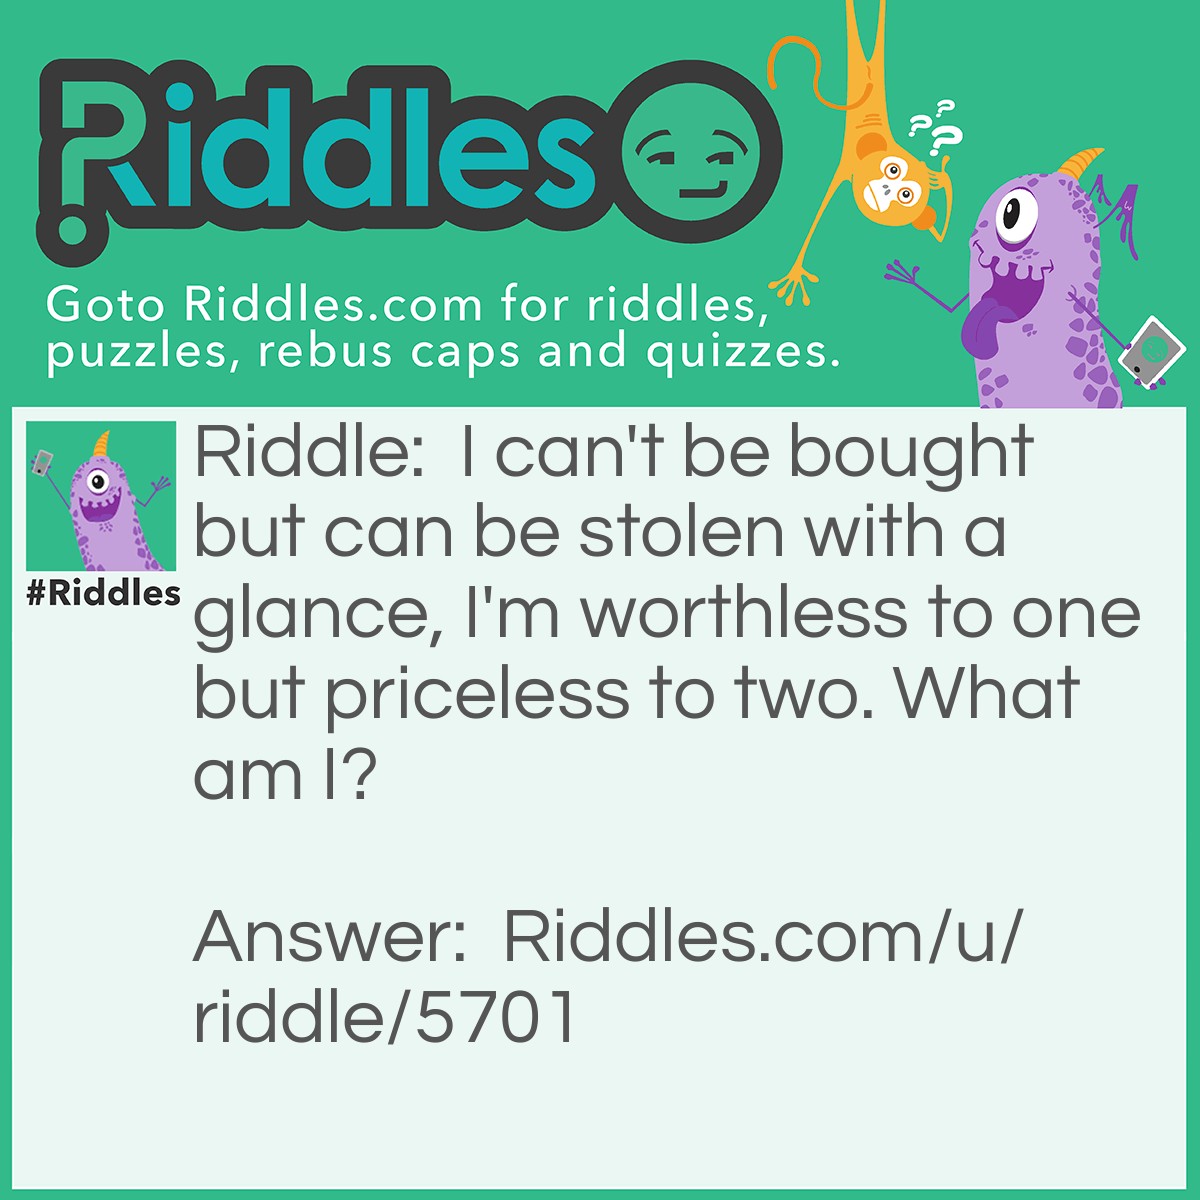 Riddle: I can't be bought but can be stolen with a glance, I'm worthless to one but priceless to two. What am I? Answer: Love.